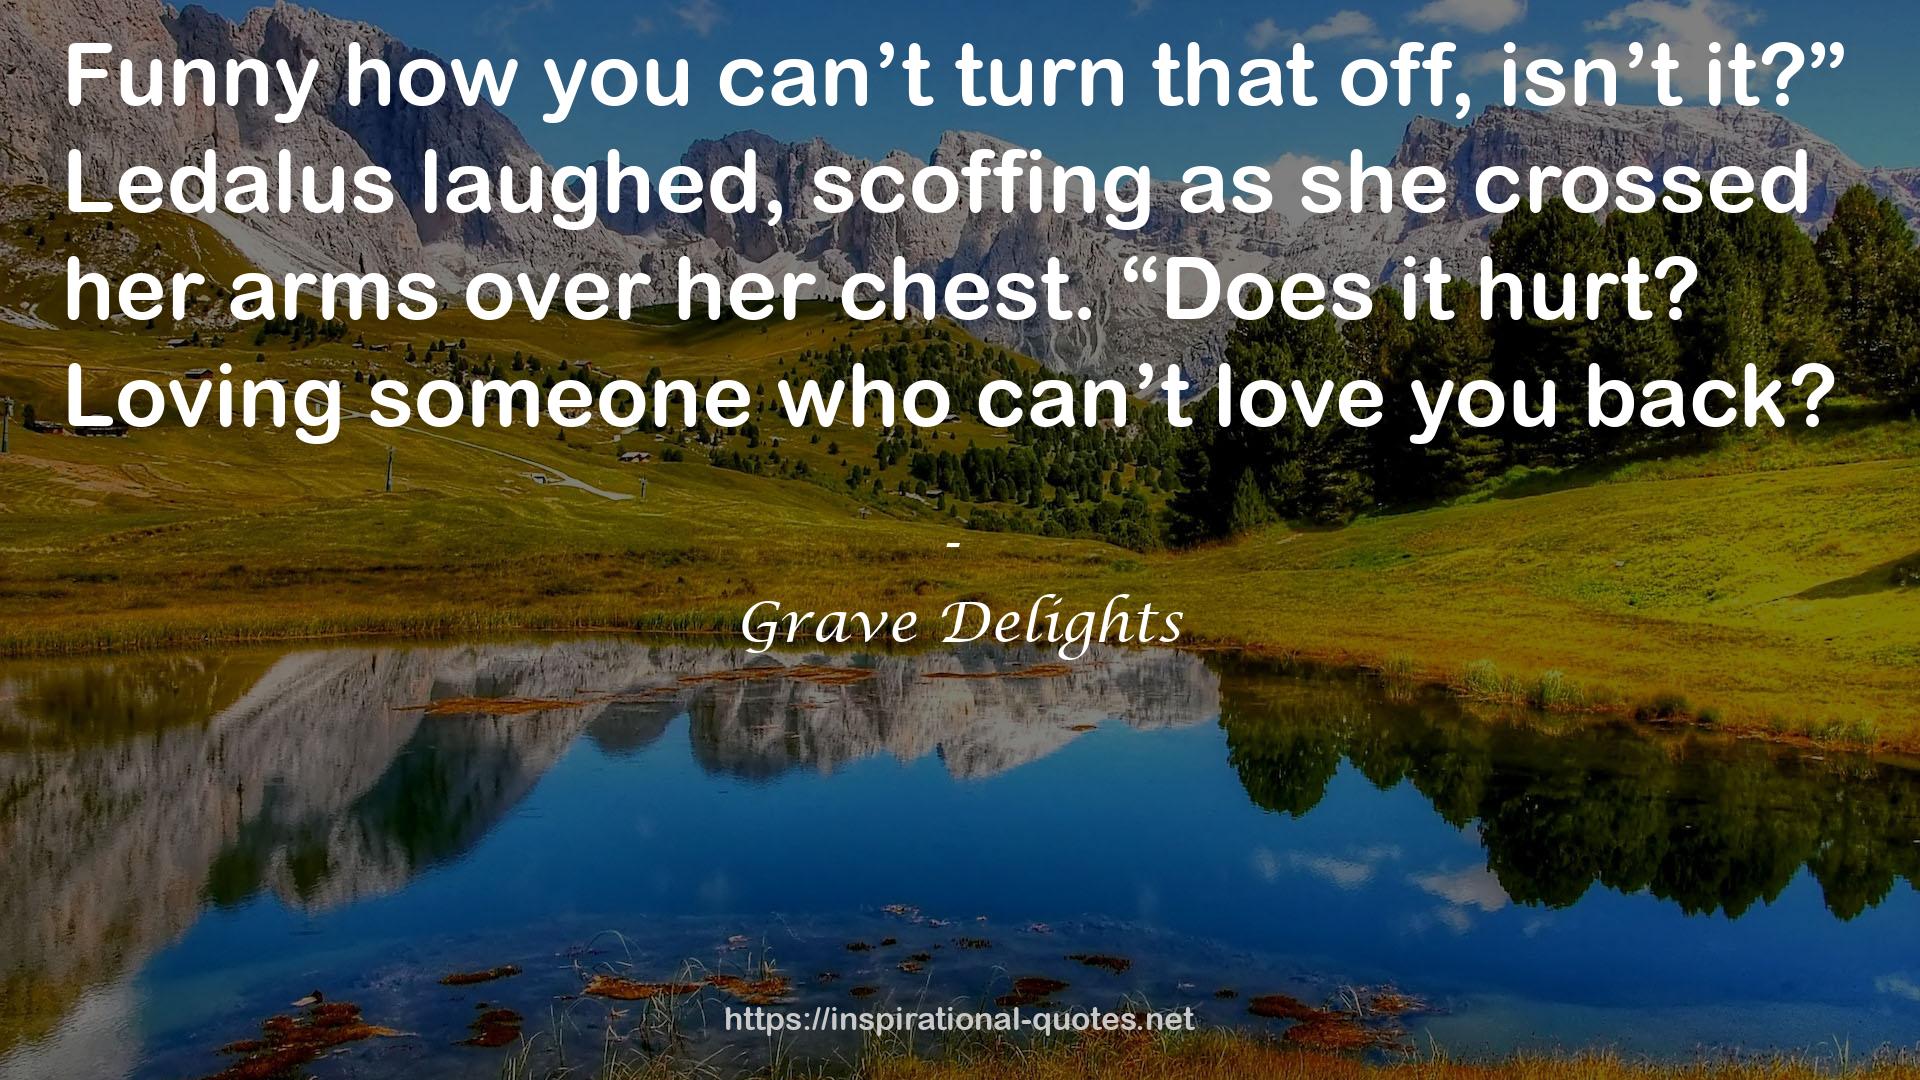 Grave Delights QUOTES